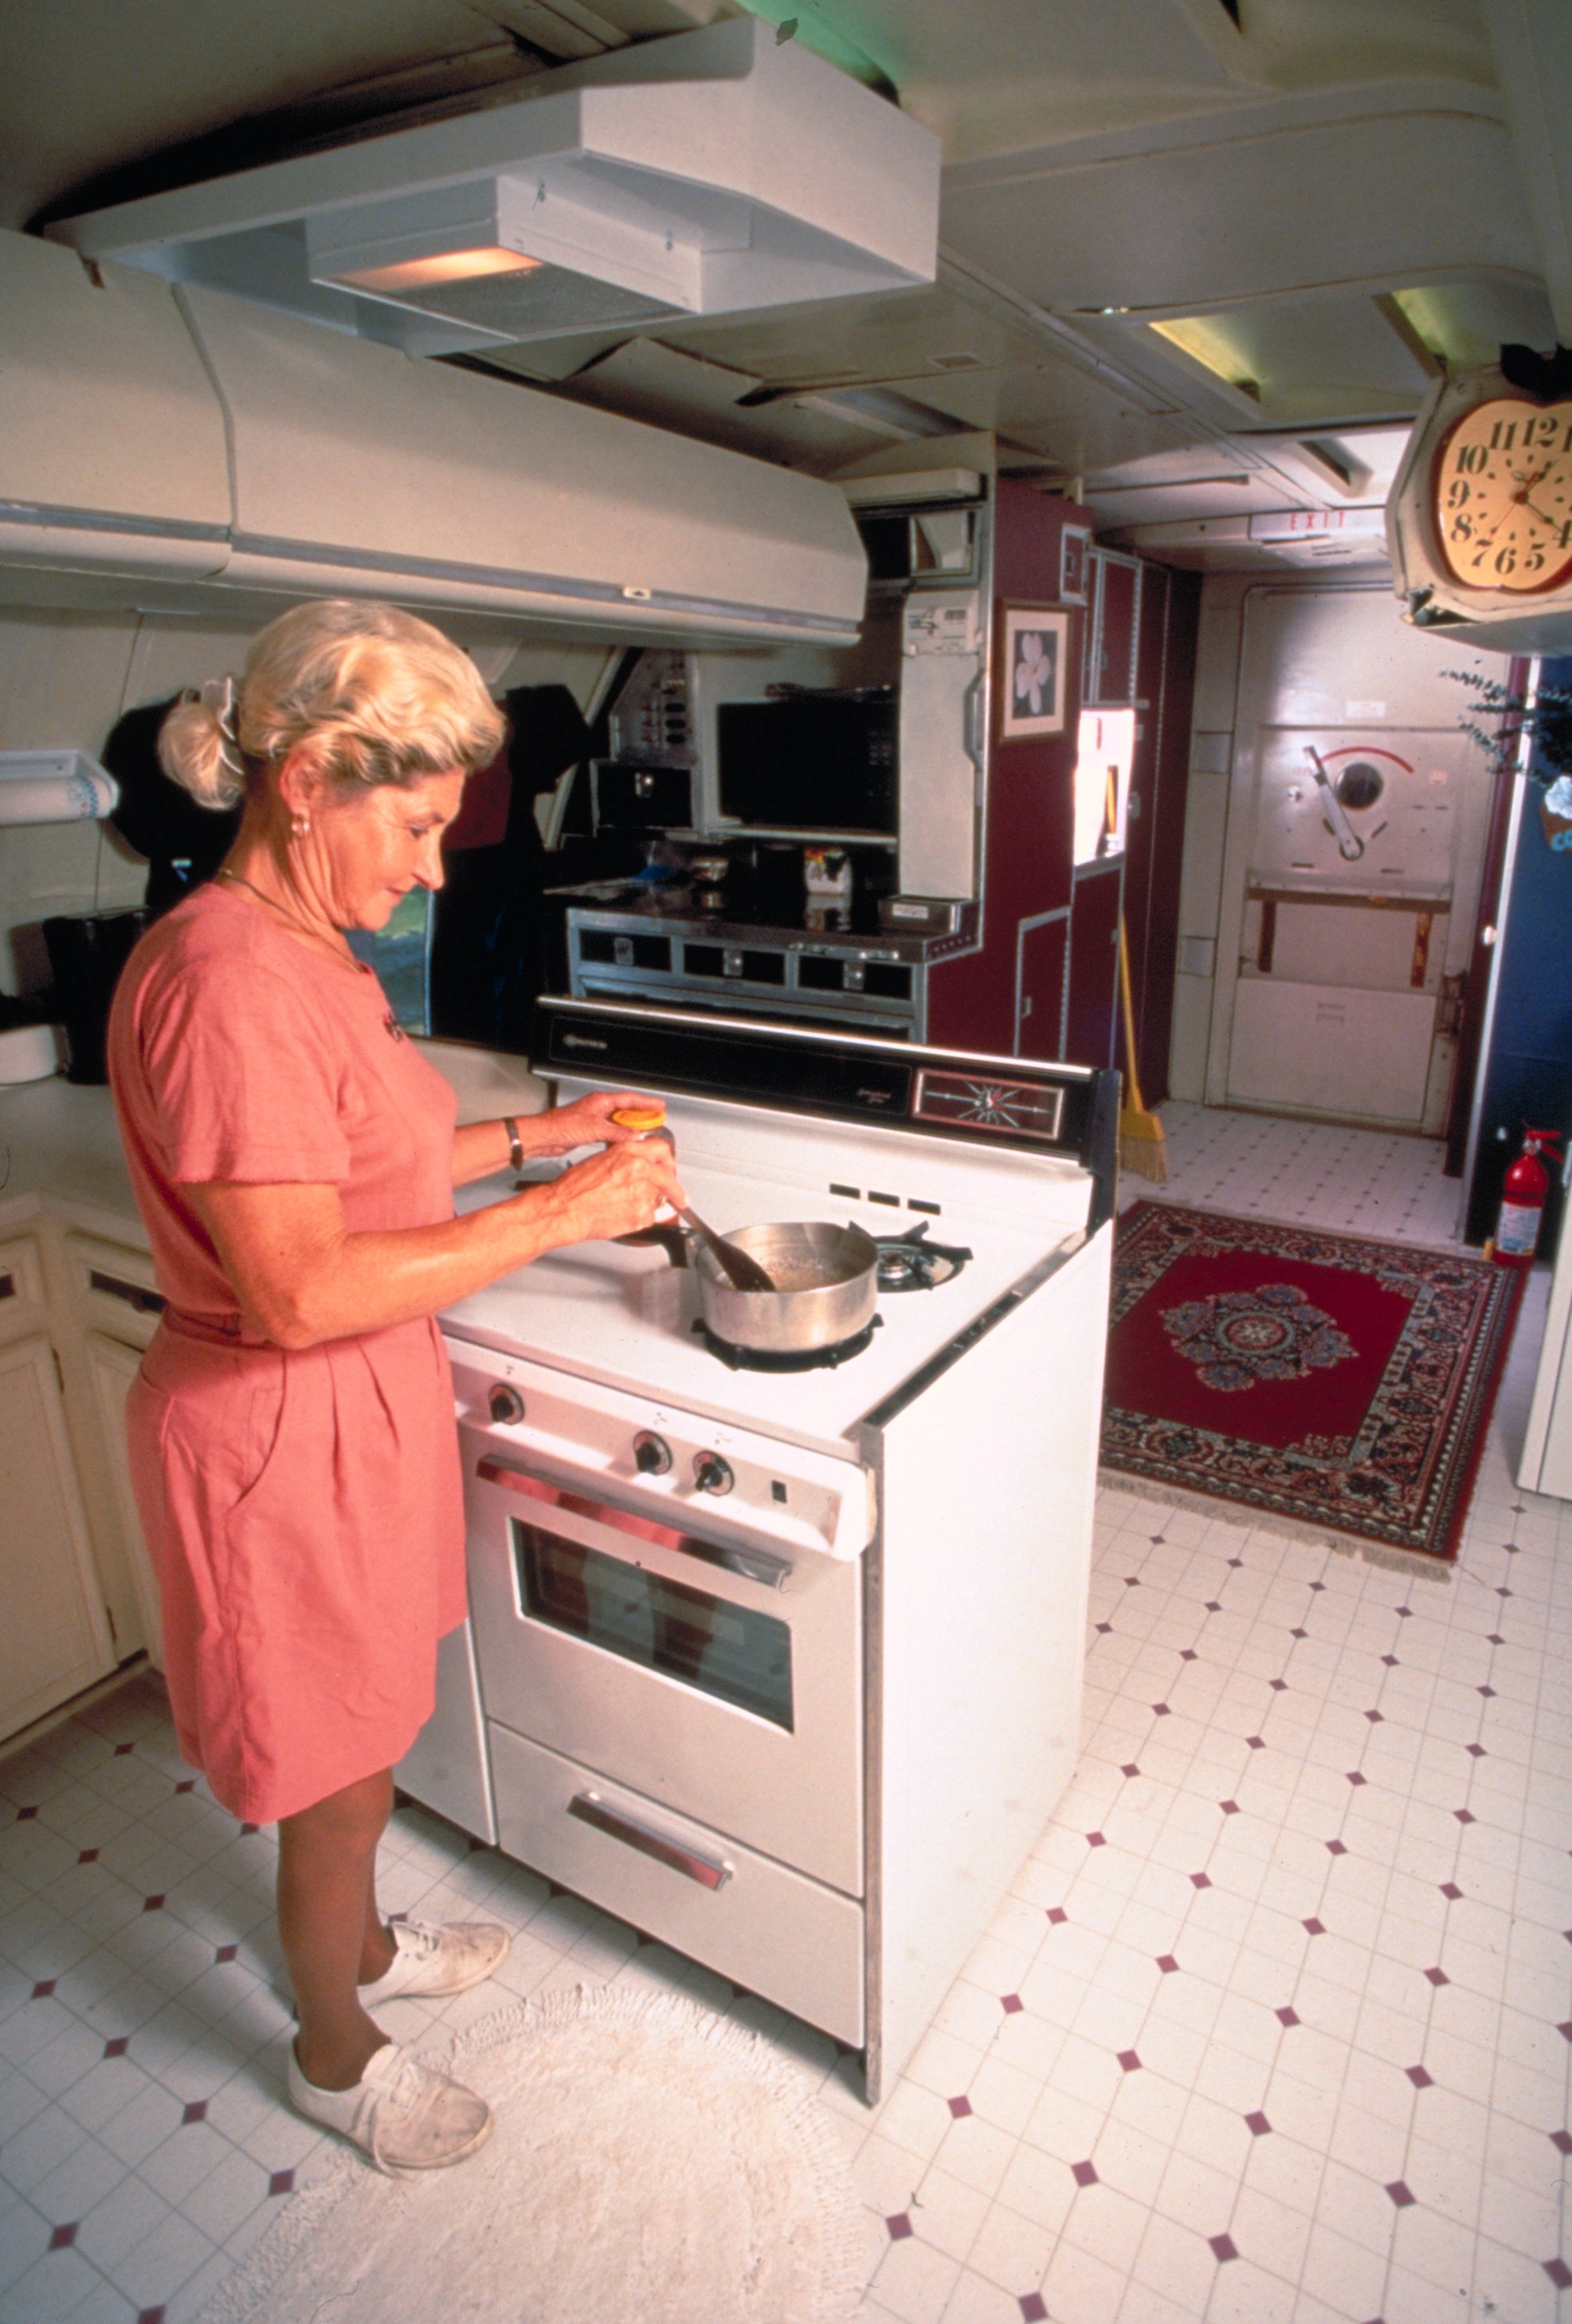 Beautician Jo Ann Ussery cooking at home, which is converted Boeing 727 fuselage. | Source: Getty Images